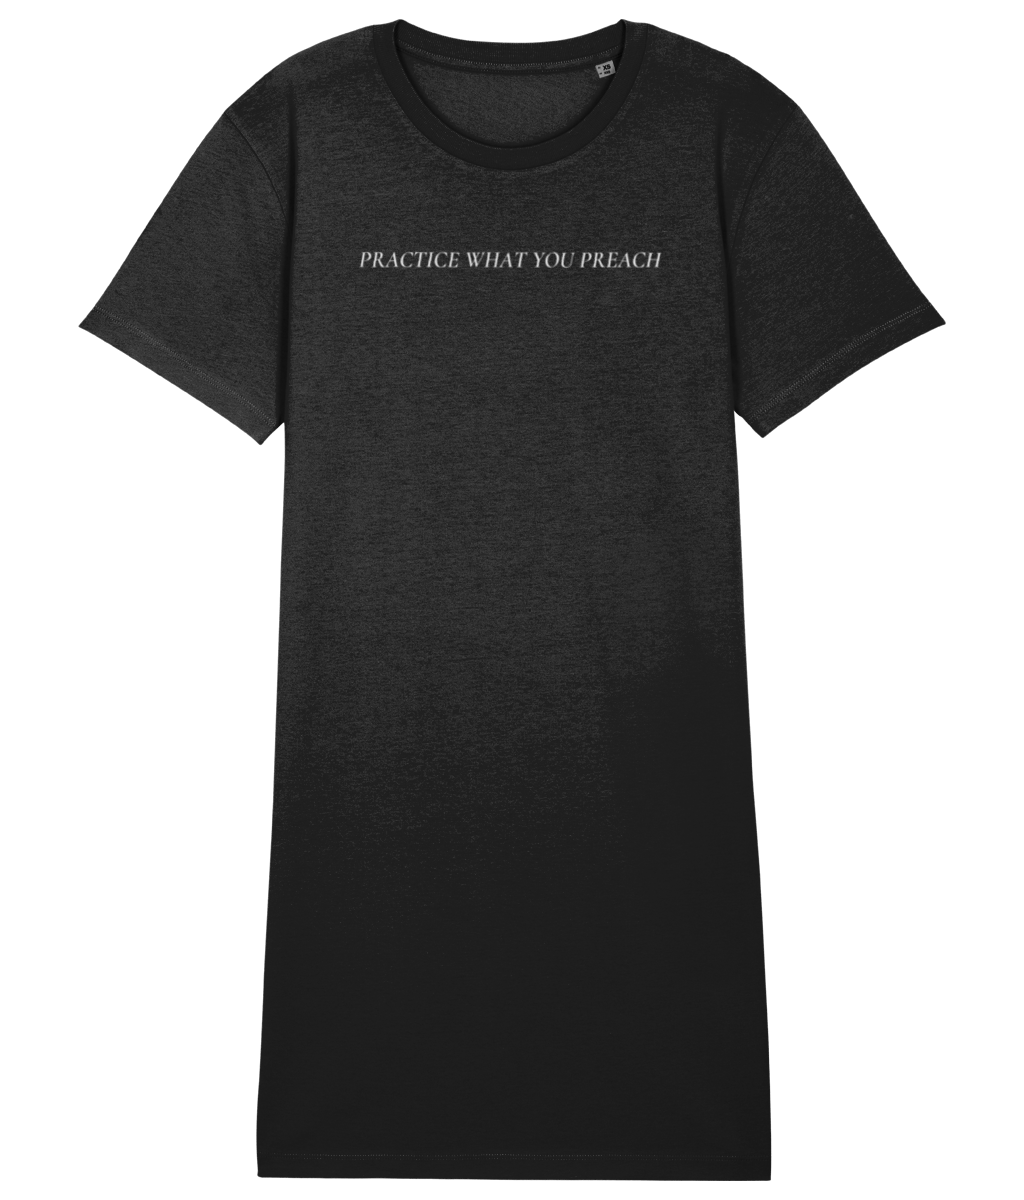 PRACTICE WHAT YOU PREACH T-SHIRT DRESS